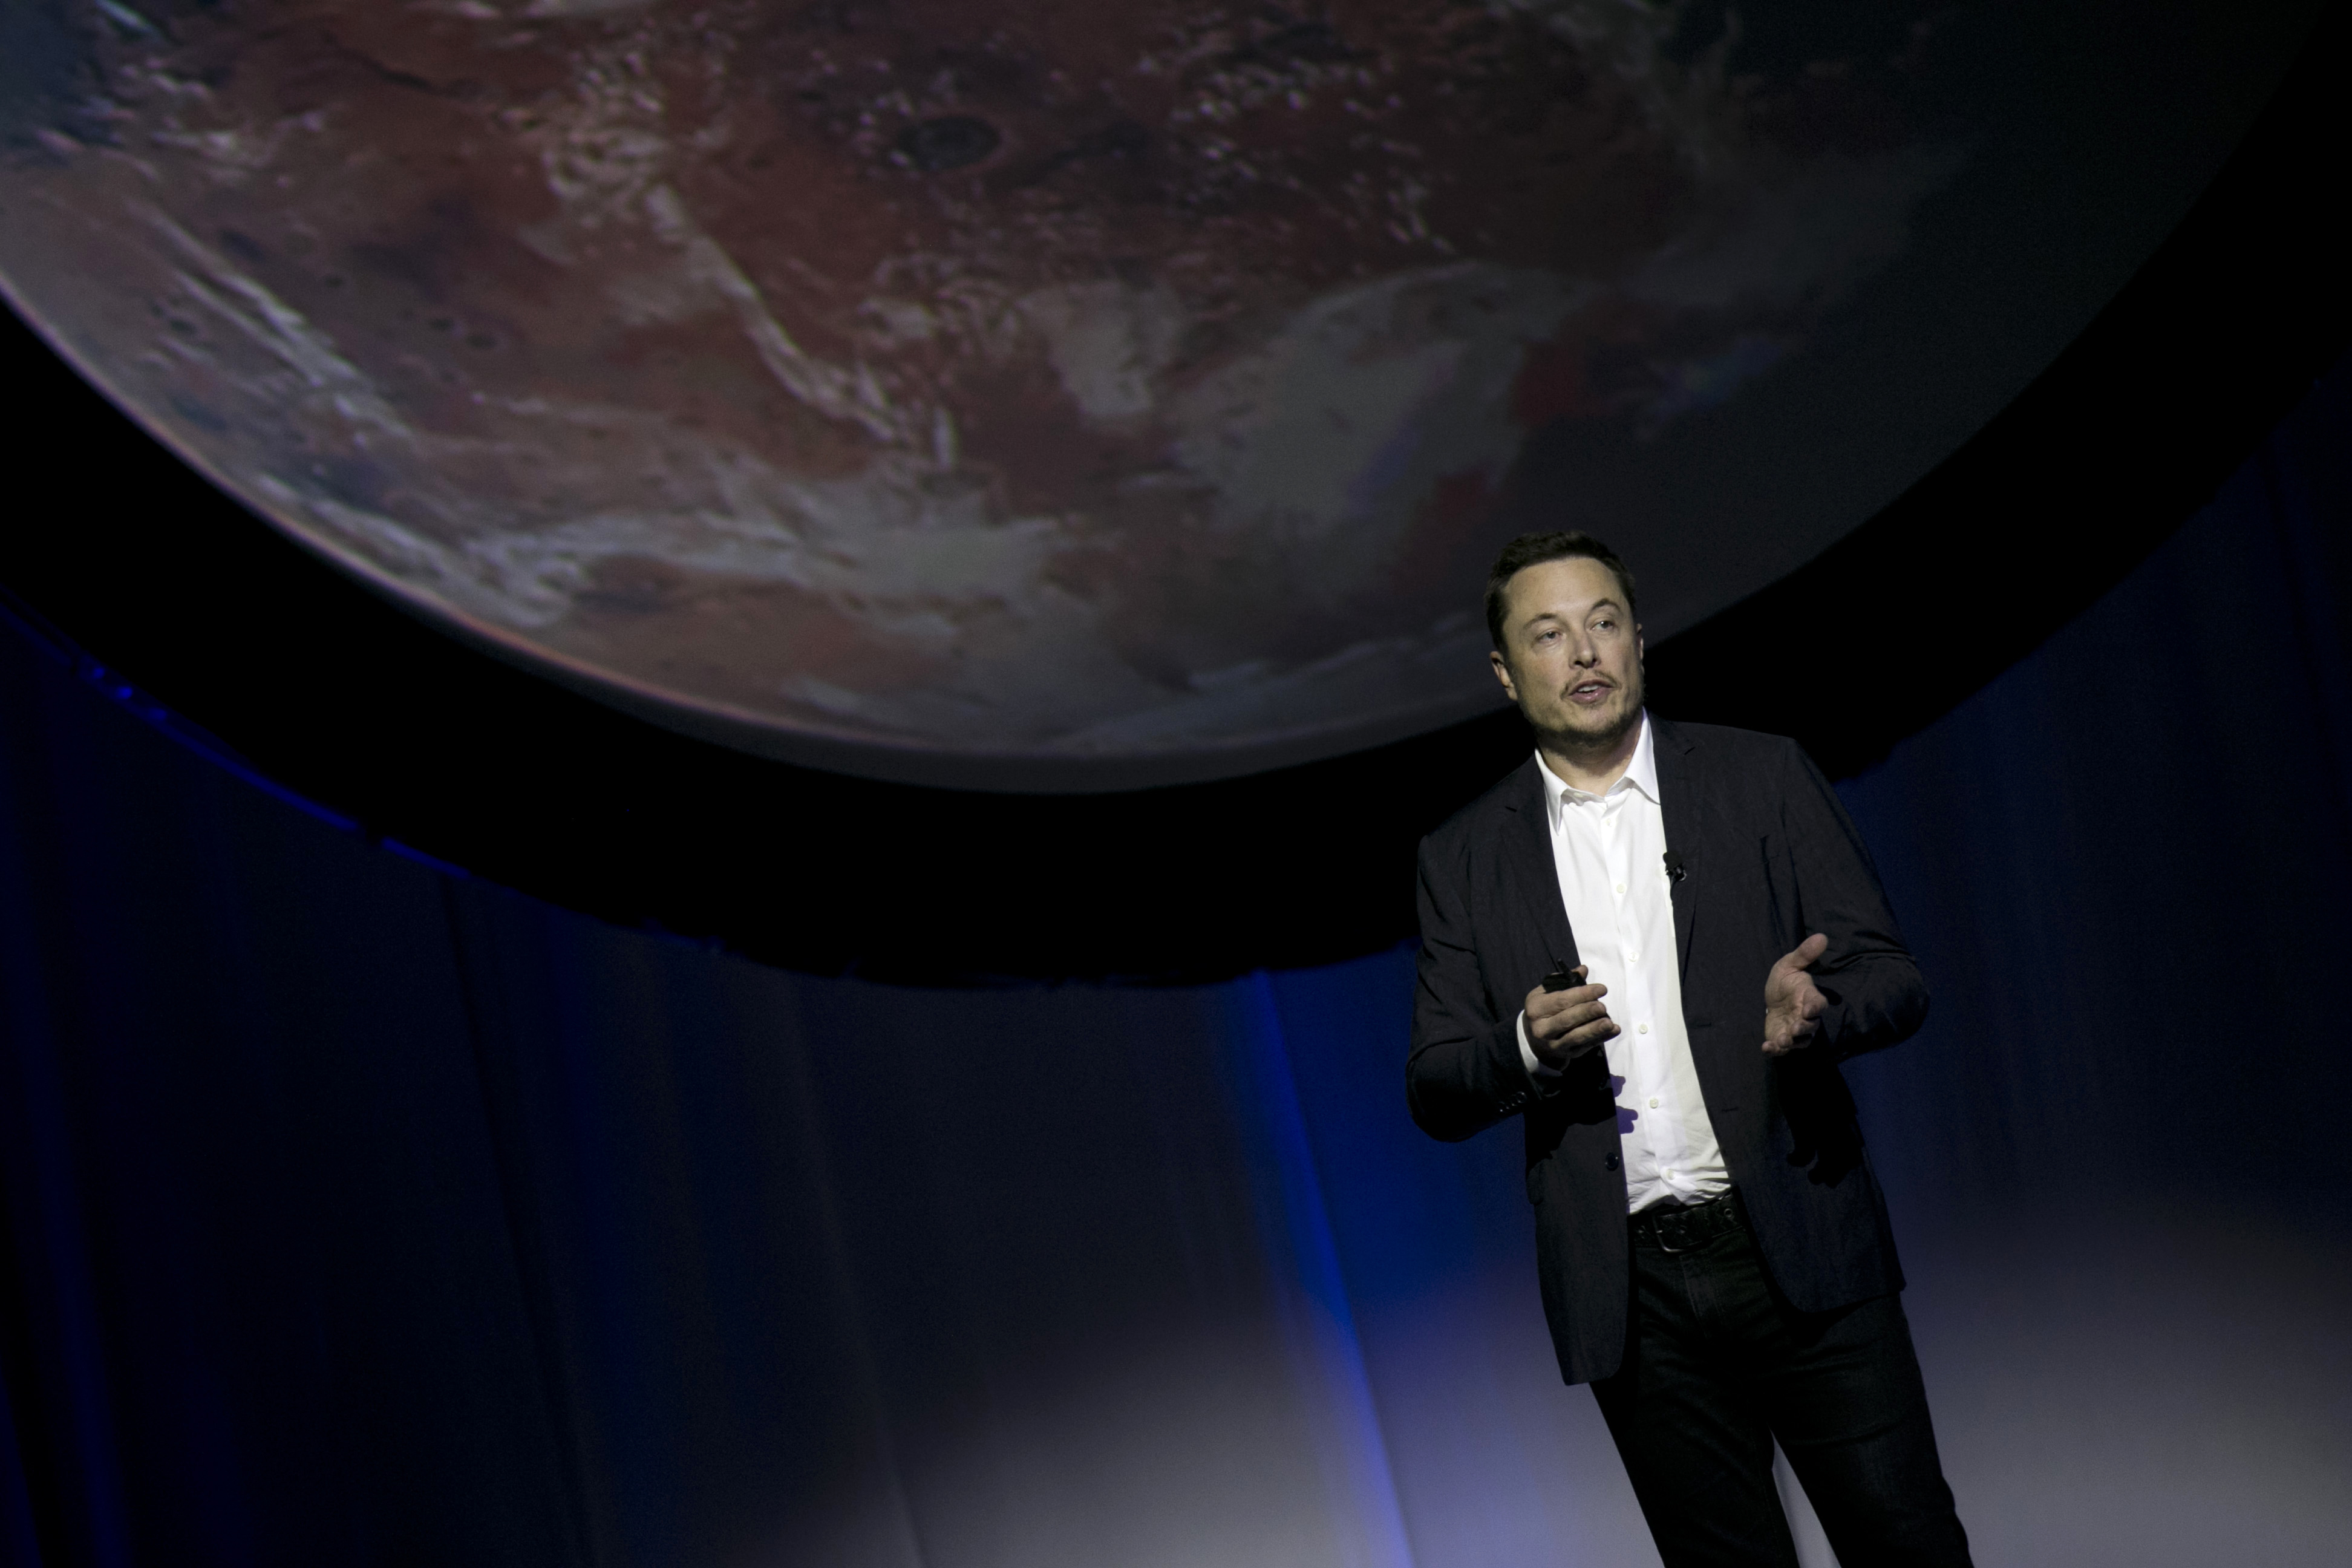 SpaceX founder Elon Musk speaks during the 67th International Astronautical Congress in Guadalajara, Mexico, Tuesday, Sept. 27, 2016. Pic: AP.